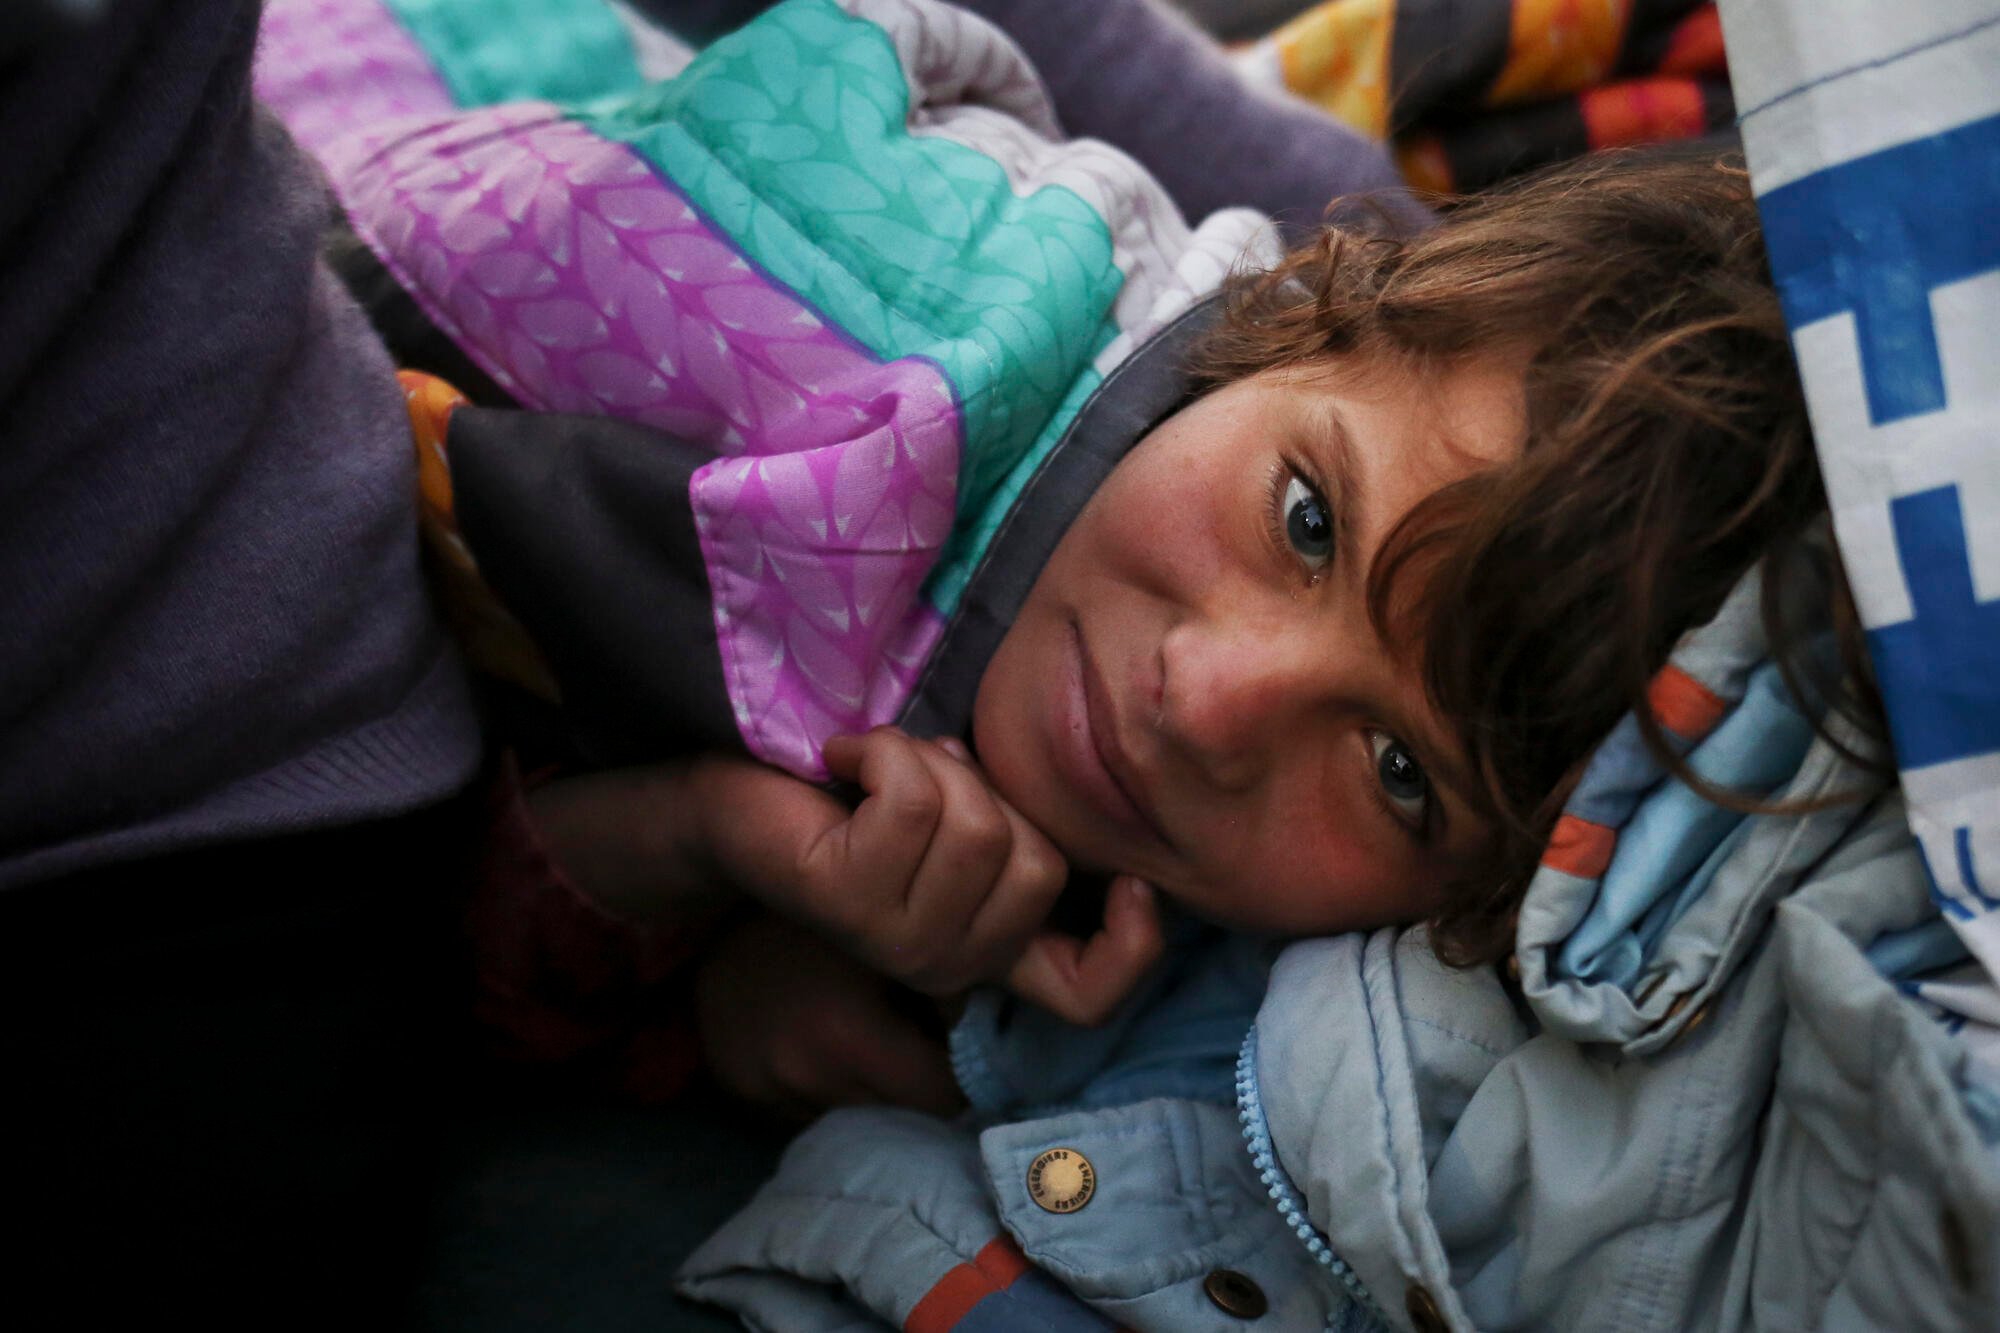 A Syrian refugee girl stays warm in blankets inside a tent in Greece